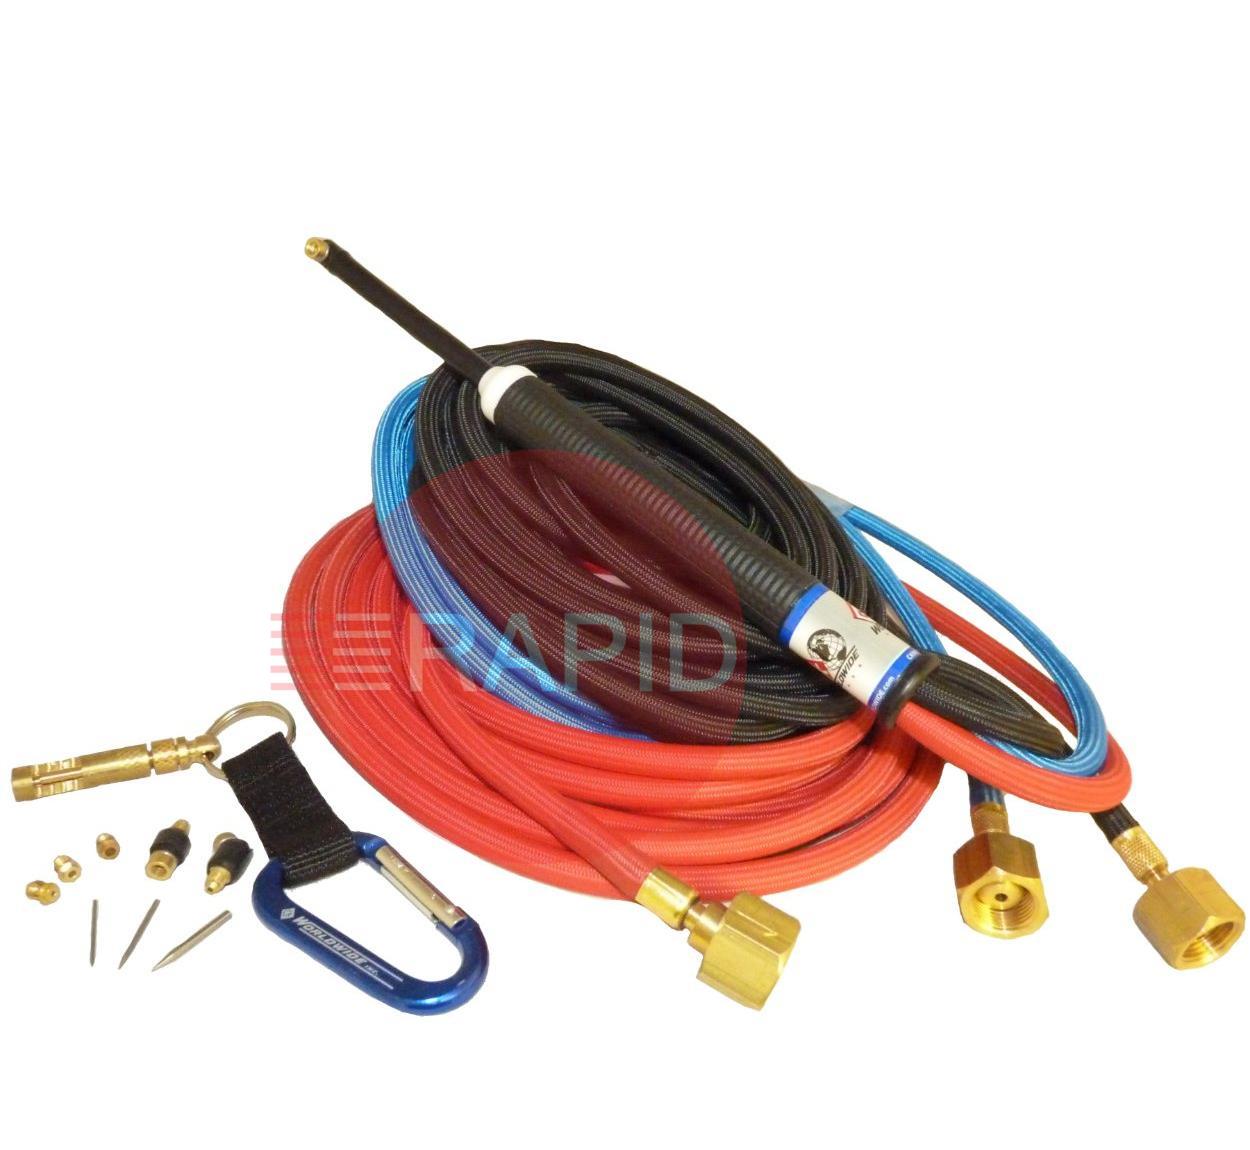 CK-MR1425SF  CK MR140 Water Cooled Micro Torch Package, 140Amp, with 7.6m Superflex Cables, 3/8 BSP